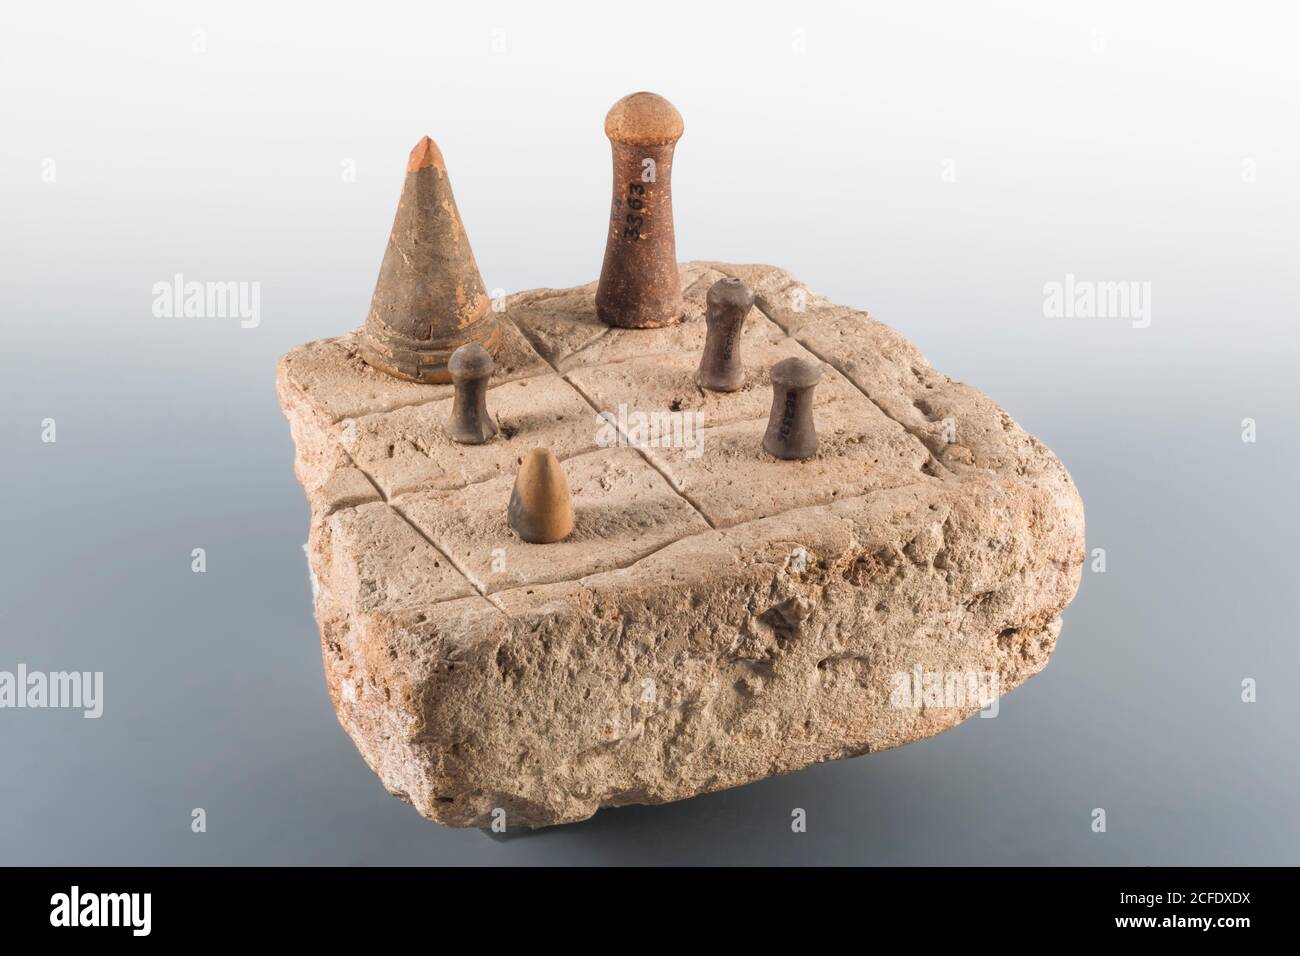 Oldest chess game board, Mohenjo daro, Indus valley civilization Gallery, National Museum of Pakistan, Karachi, Sindh, Pakistan, South Asia, Asia Stock Photo